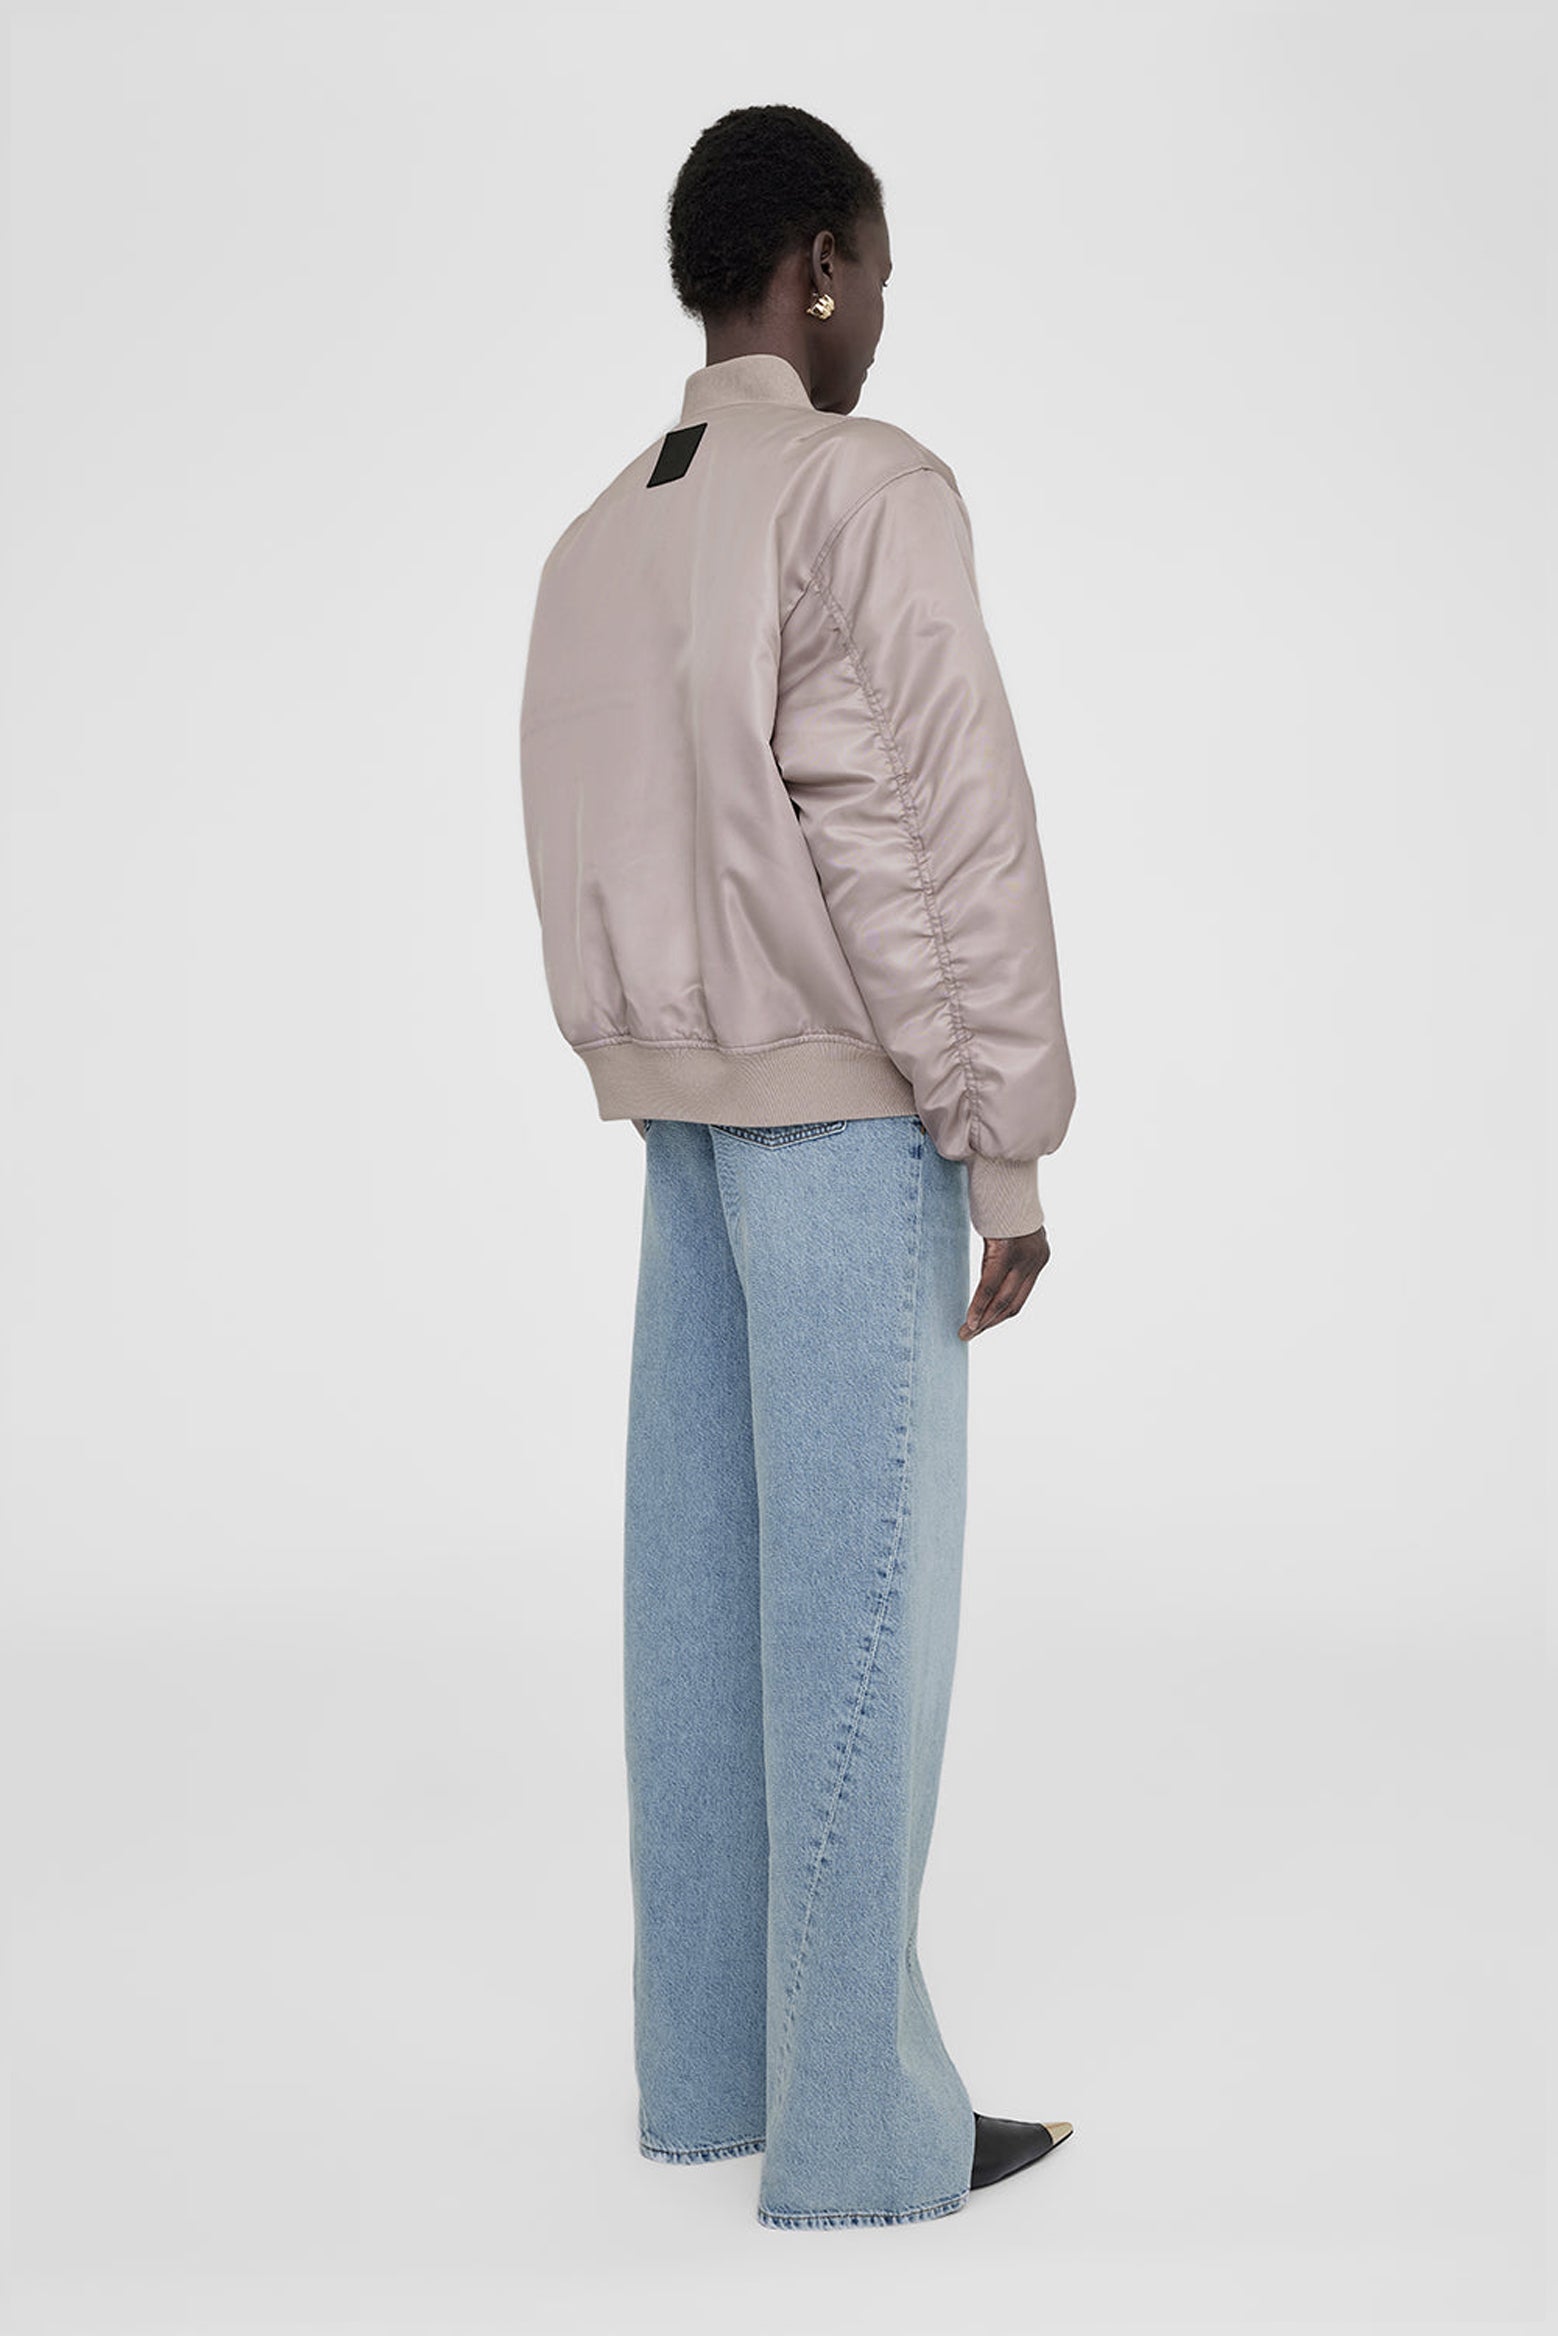 The Anine Bing Leon Bomber in Champagne available at The New Trend Australia